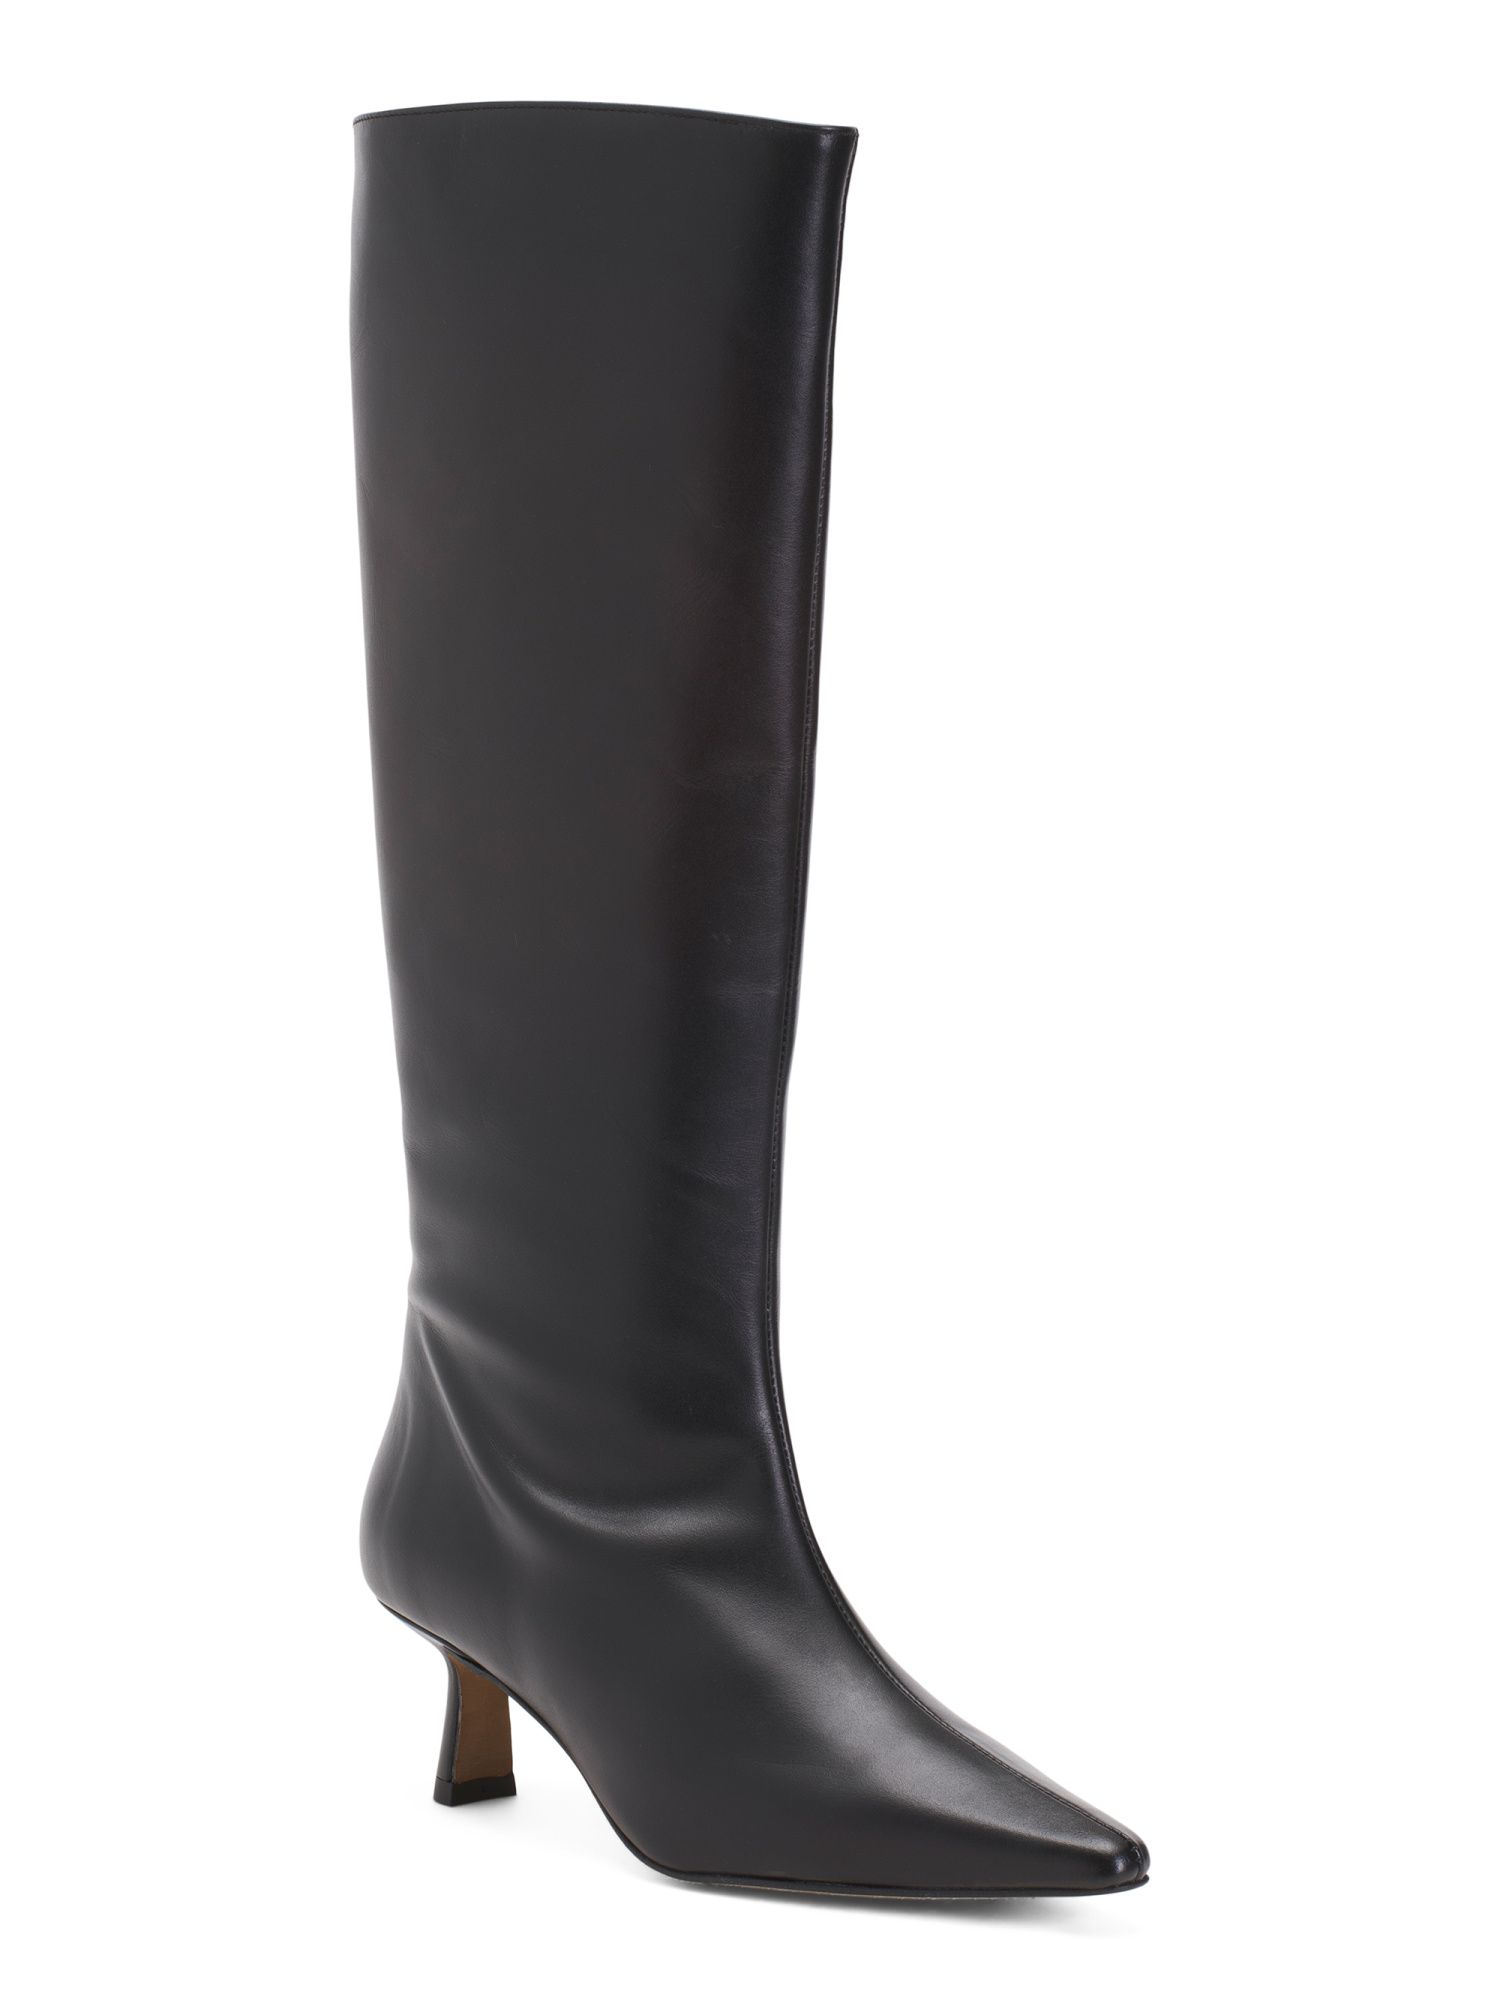 Leather High Shaft Boots | Women's Shoes | Marshalls | Marshalls